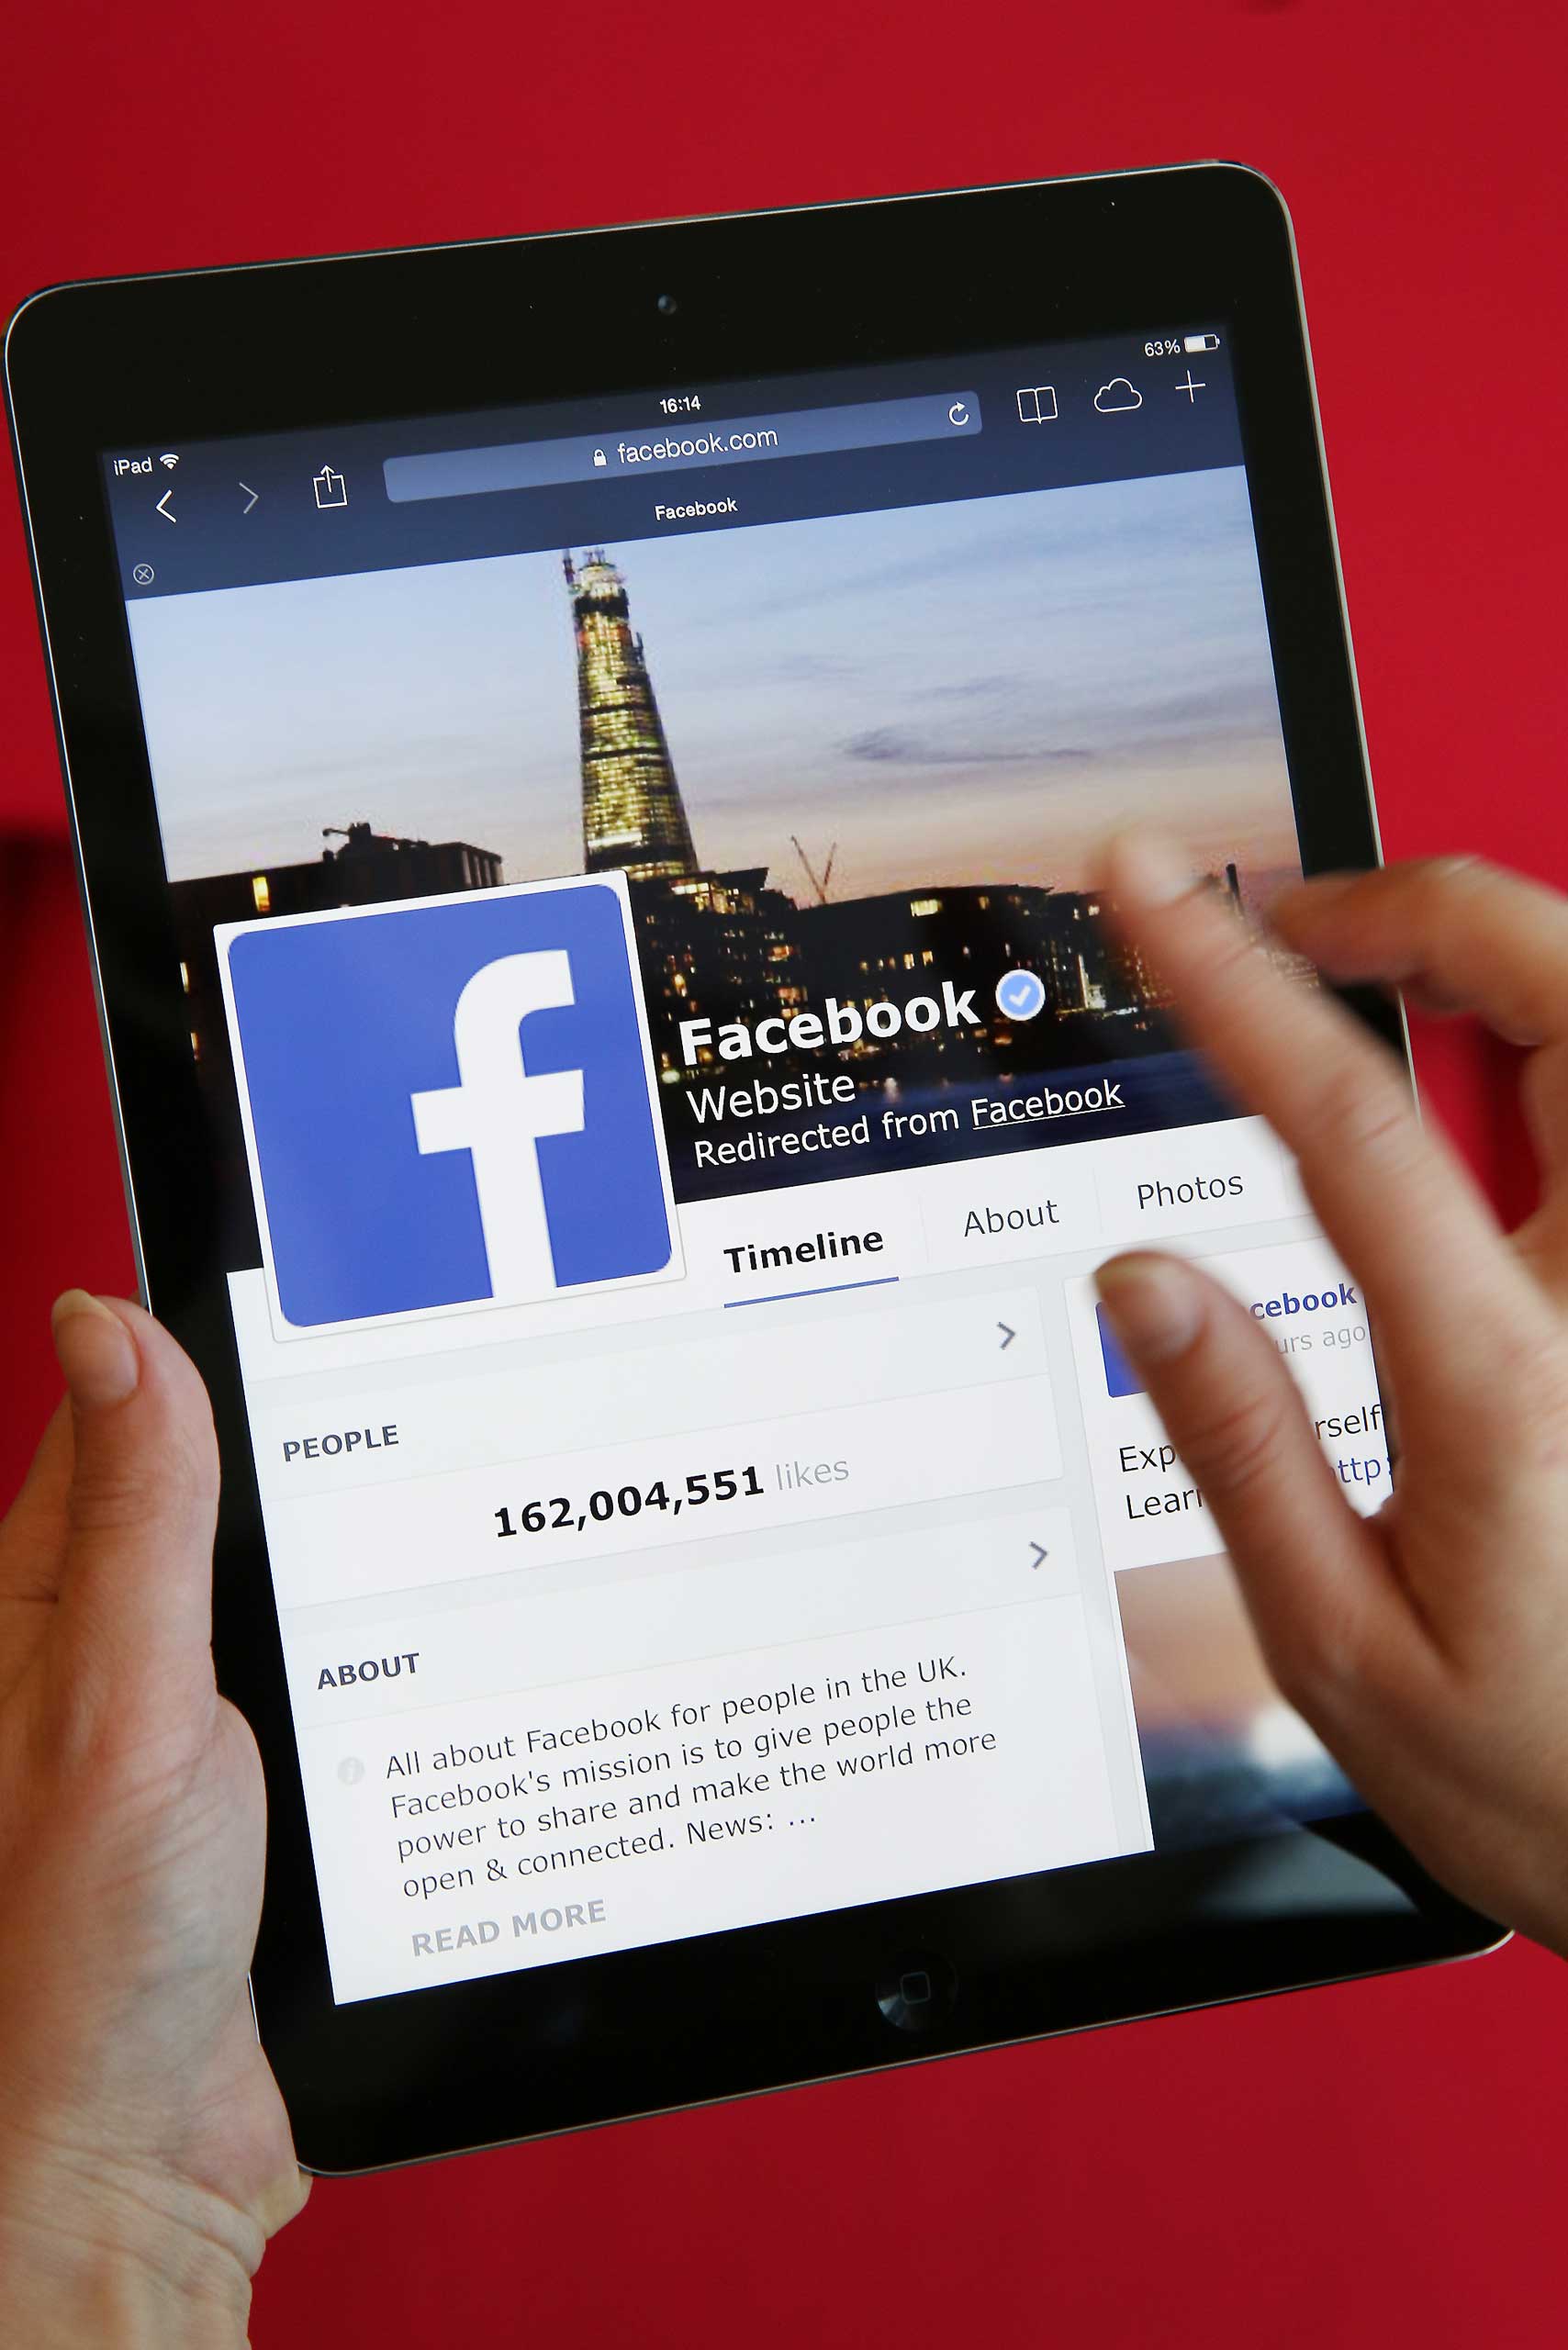 An Apple iPad displays Facebook's profile page on Aug. 6, 2014. (Peter Macdiarmid—Getty Images)